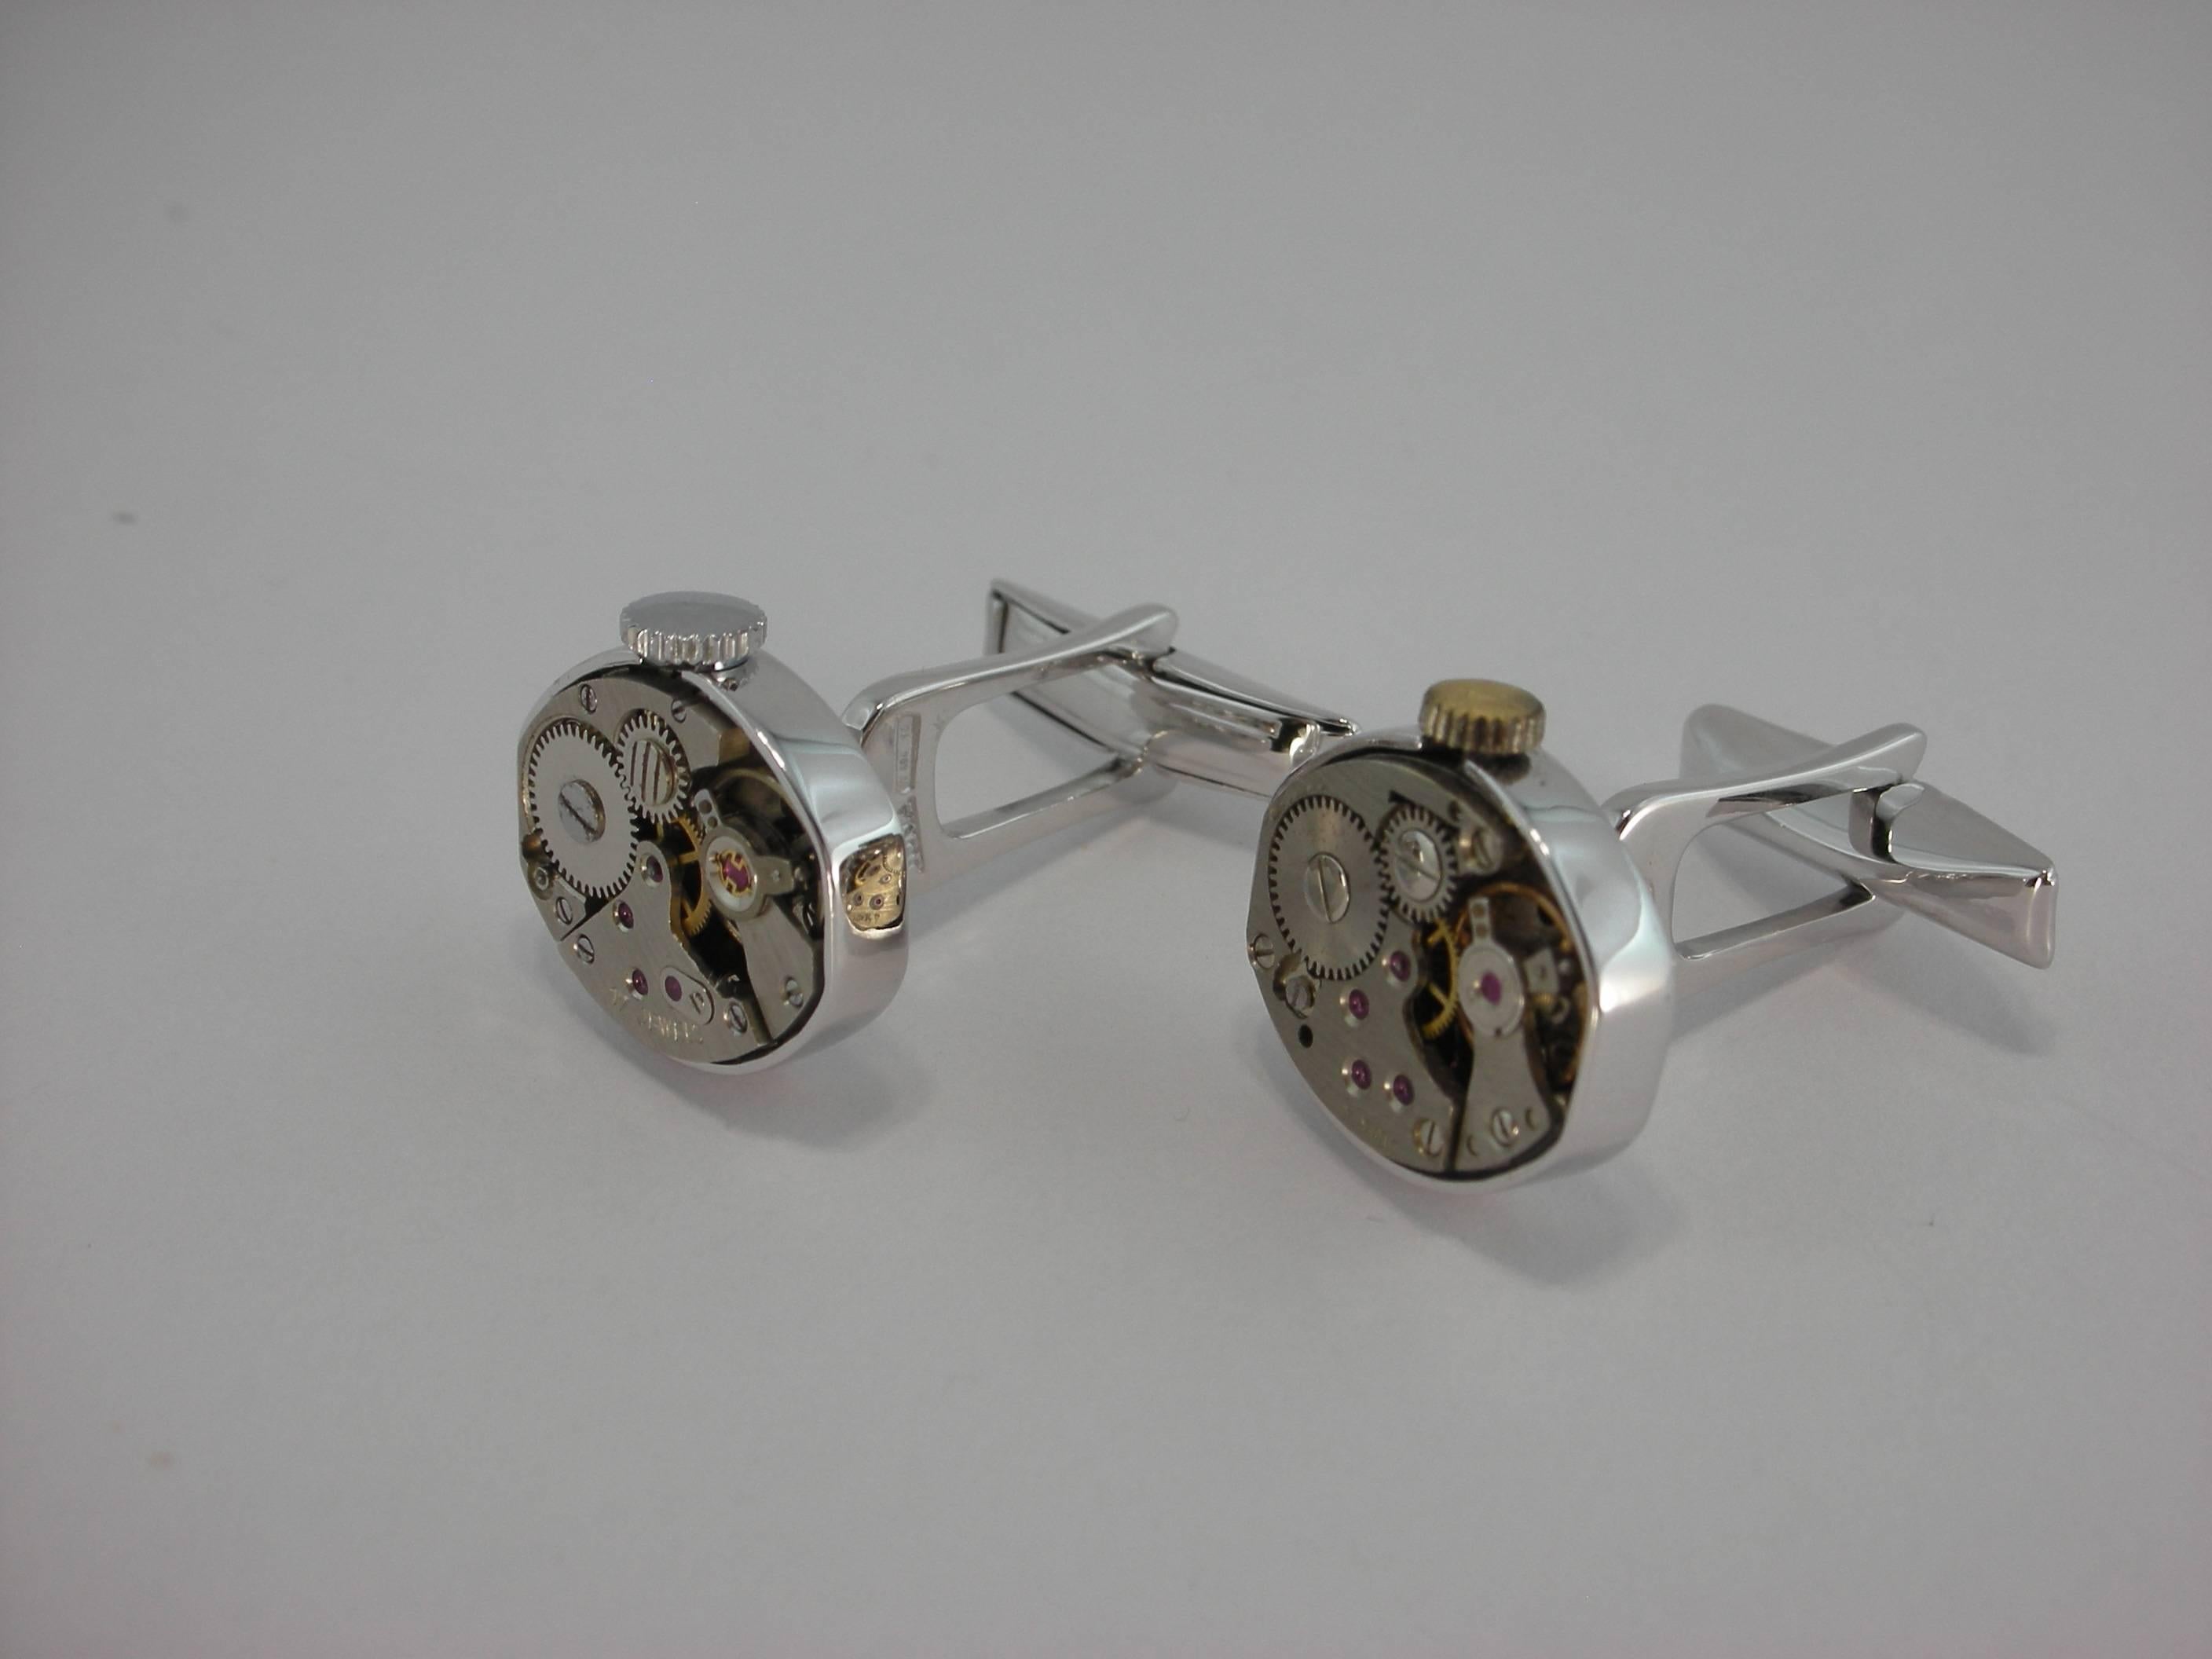 These rhodium plated sterling silver cufflinks, hand crafted in Italy by Jona, are actually built using genuine antique watch movements. 

All of our jewelry is new and has never been previously owned or worn.